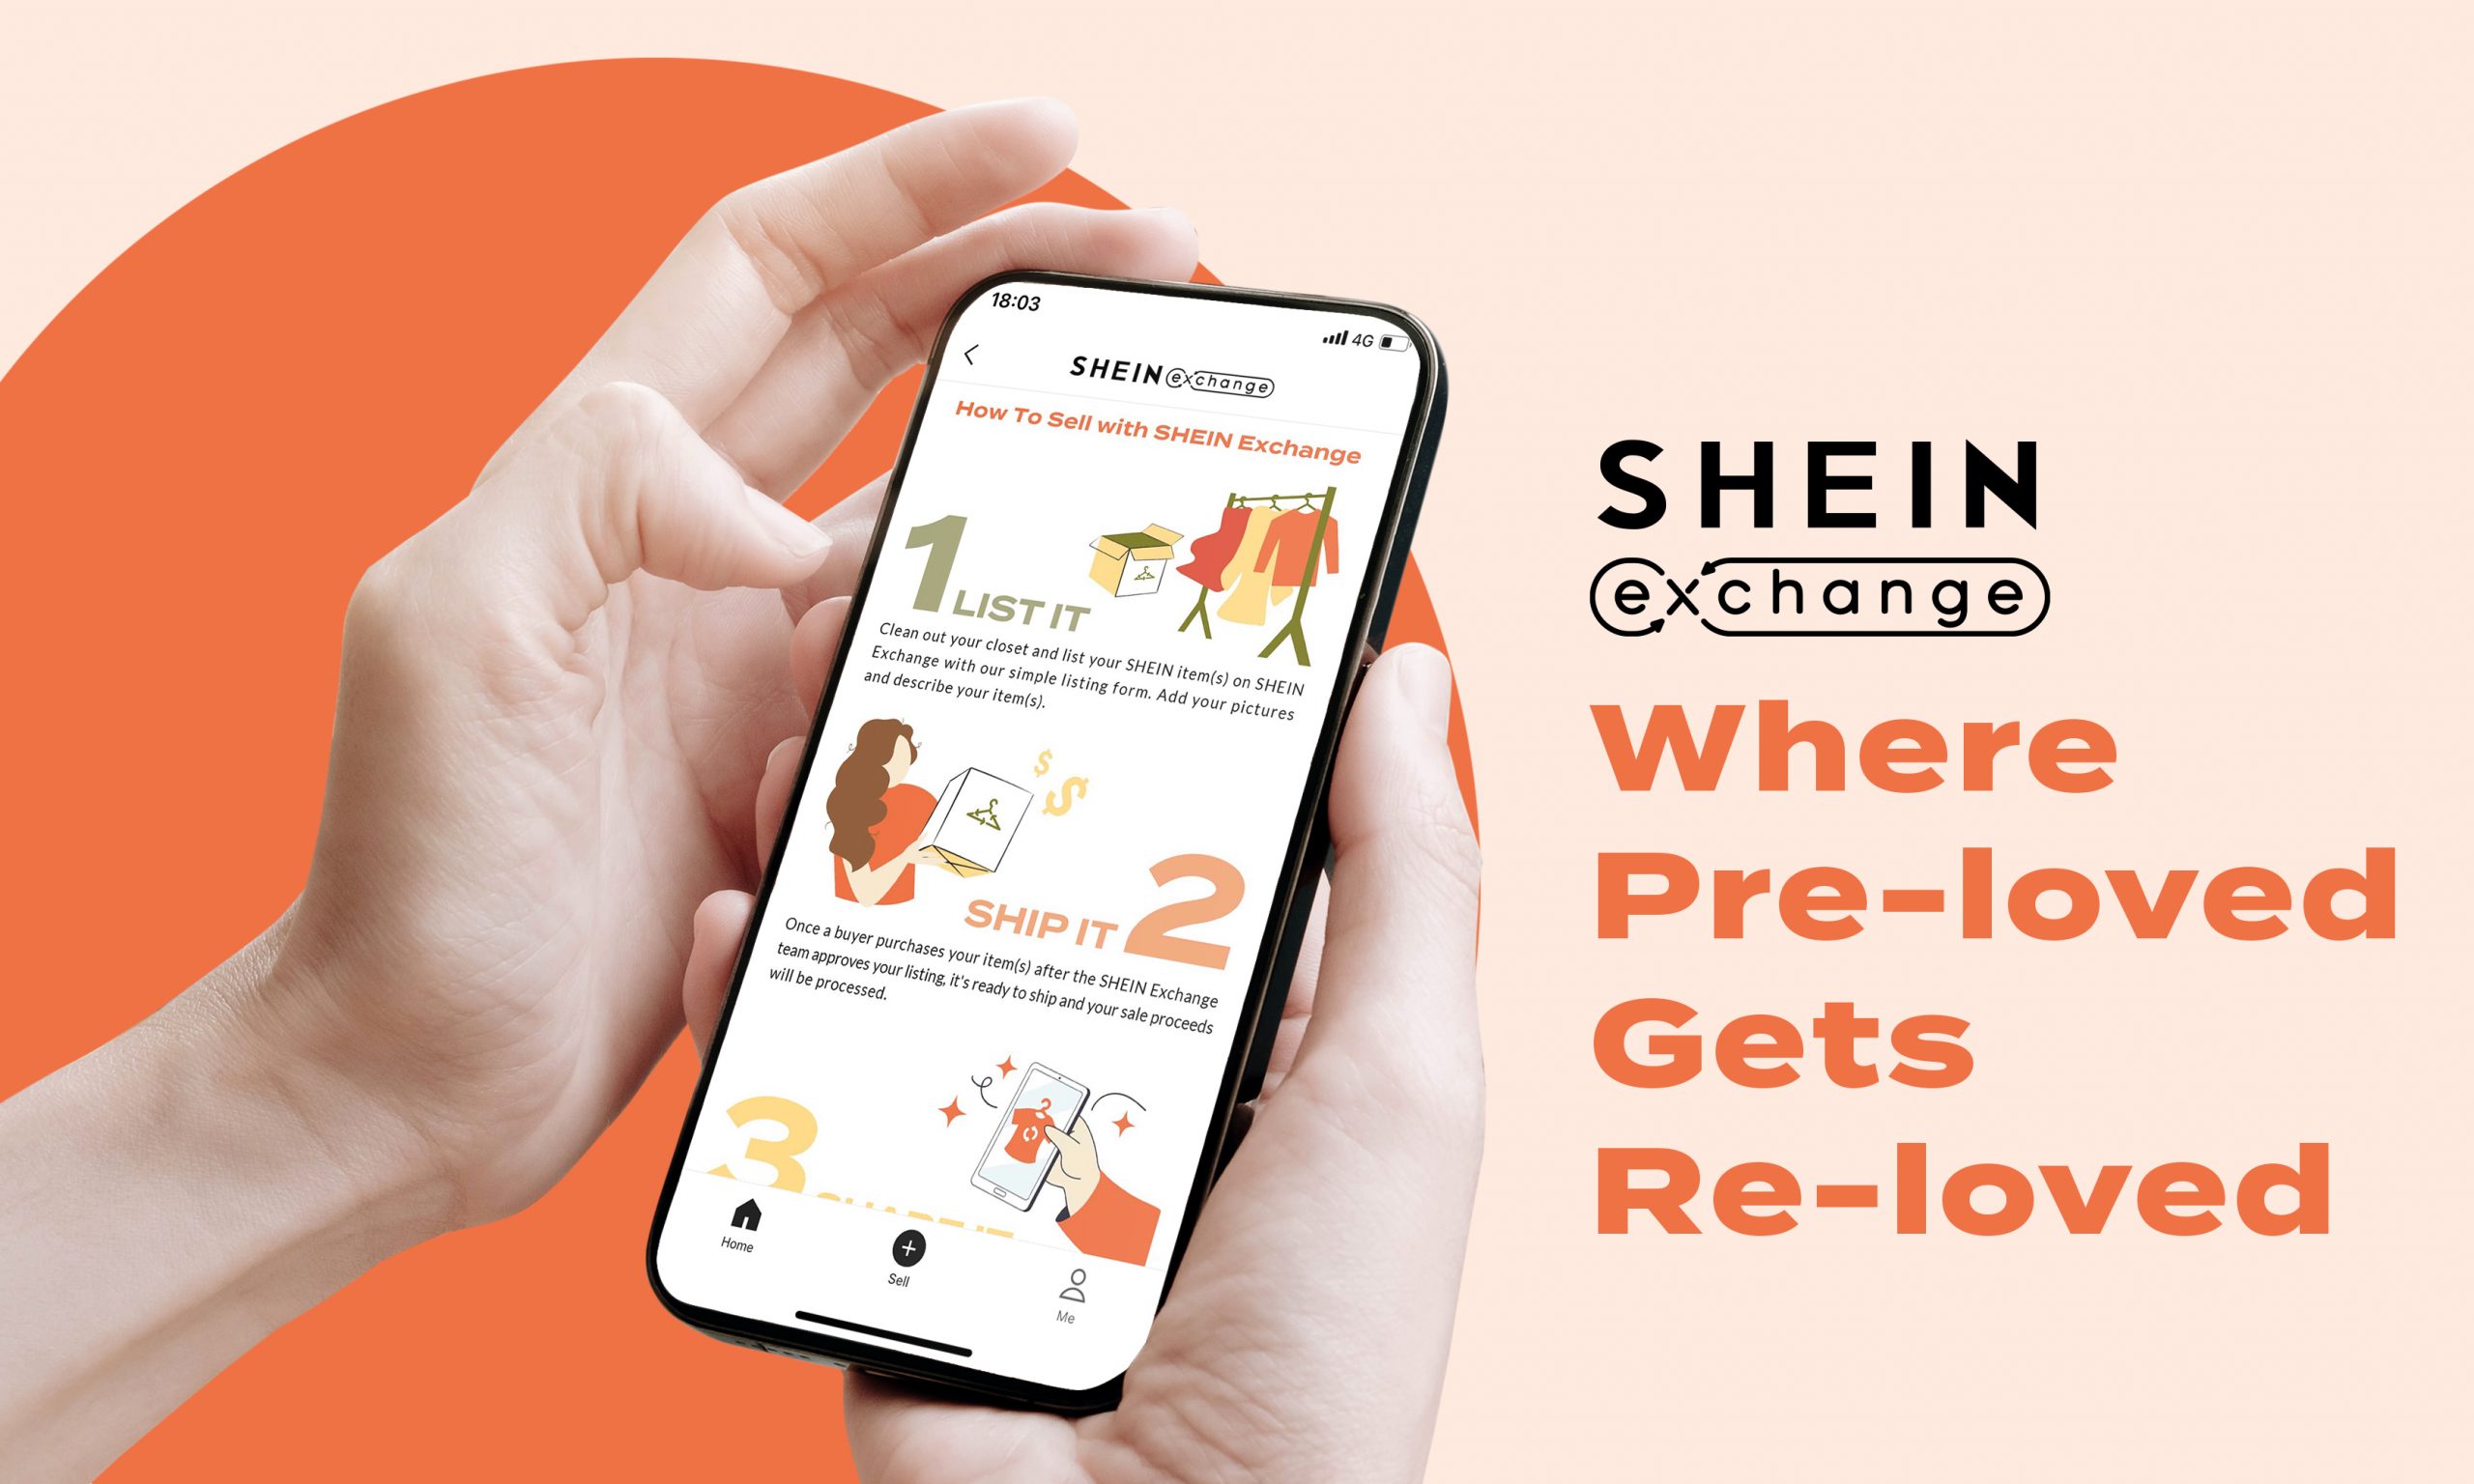 SHEIN: 7 Months At the Top of Global Shopping App Rankings - Pandaily